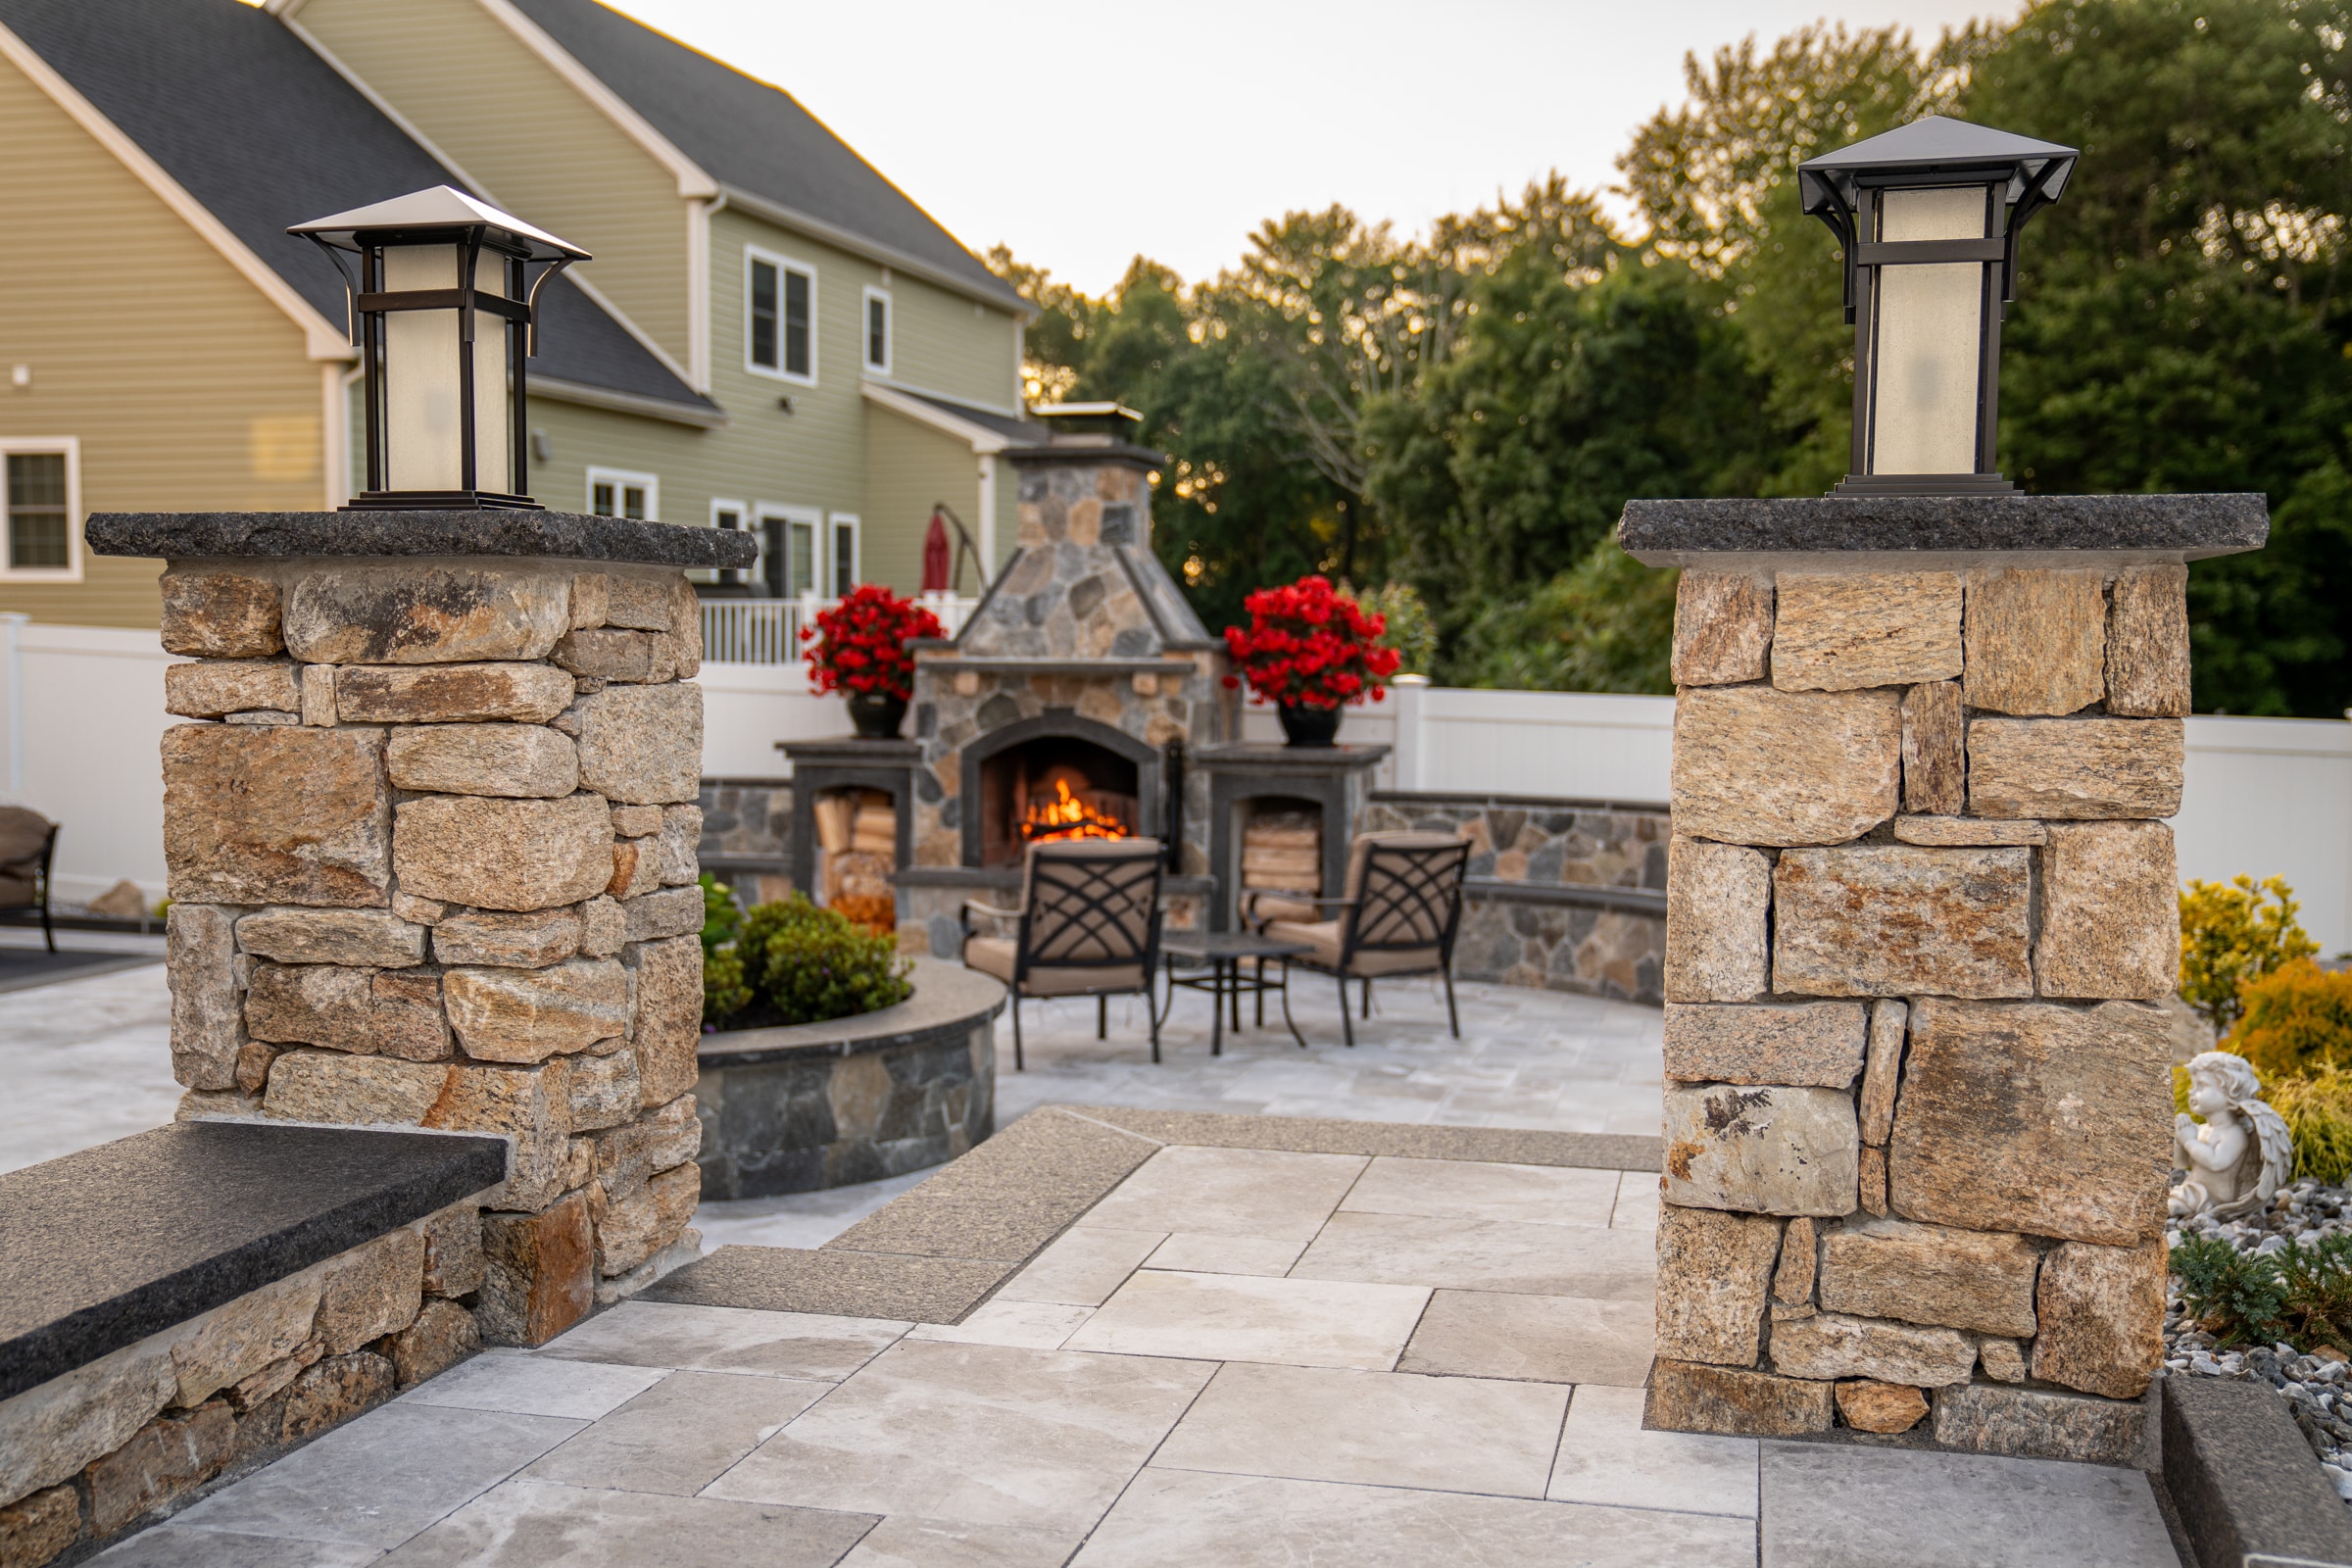 Natural stone columns flank the walkway that leads to the fireplace patio. Dex by Terra Hardscape project in Grafton, MA.